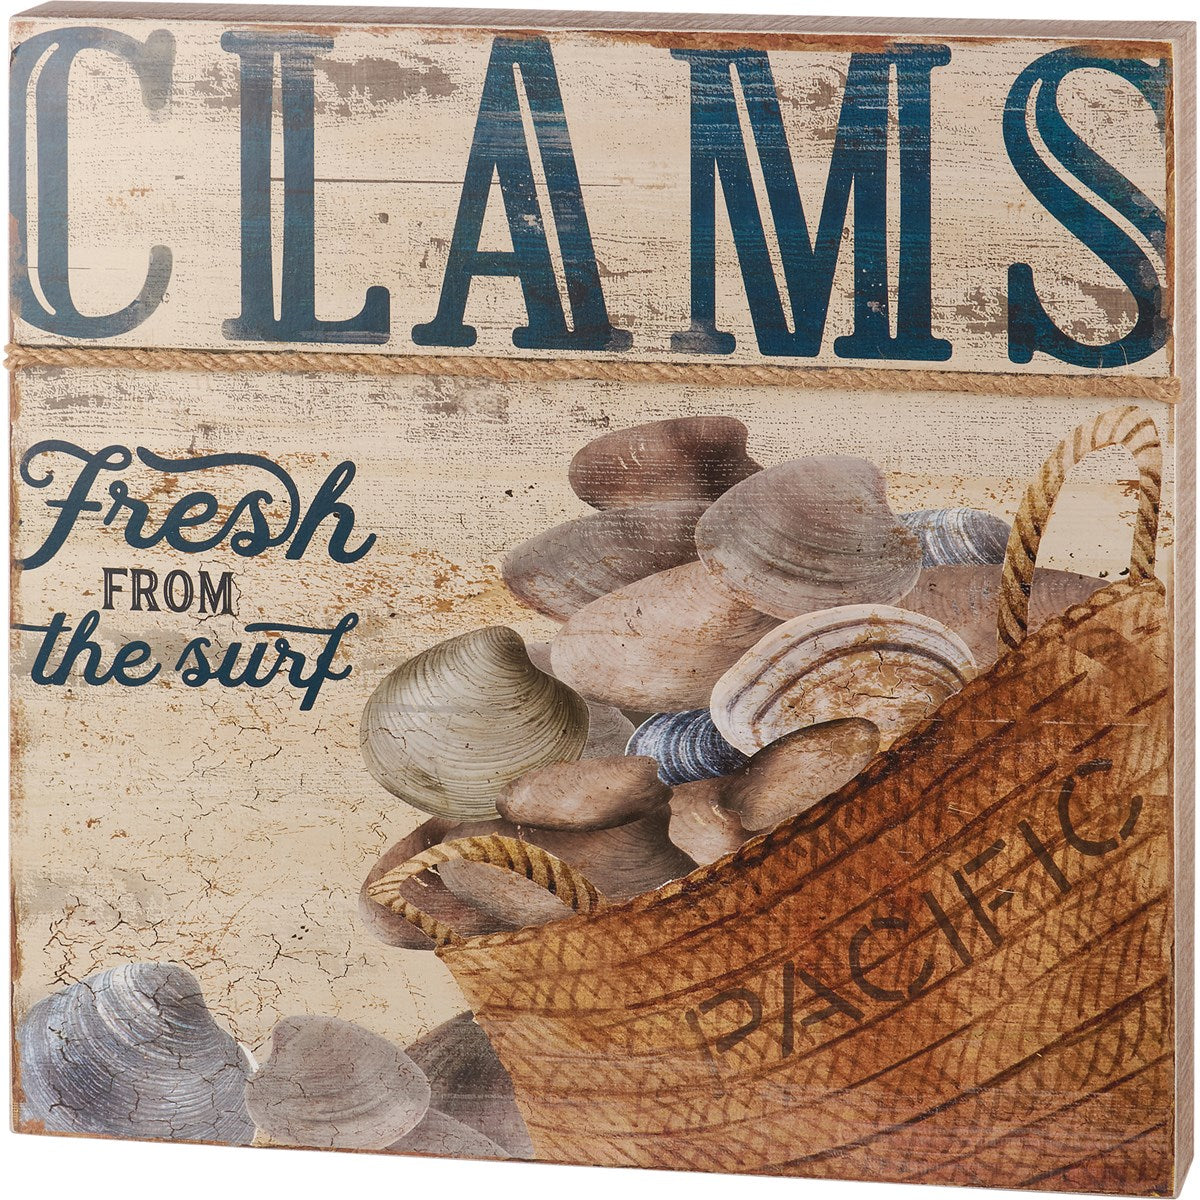 Clams - Fresh From The Surf Sign